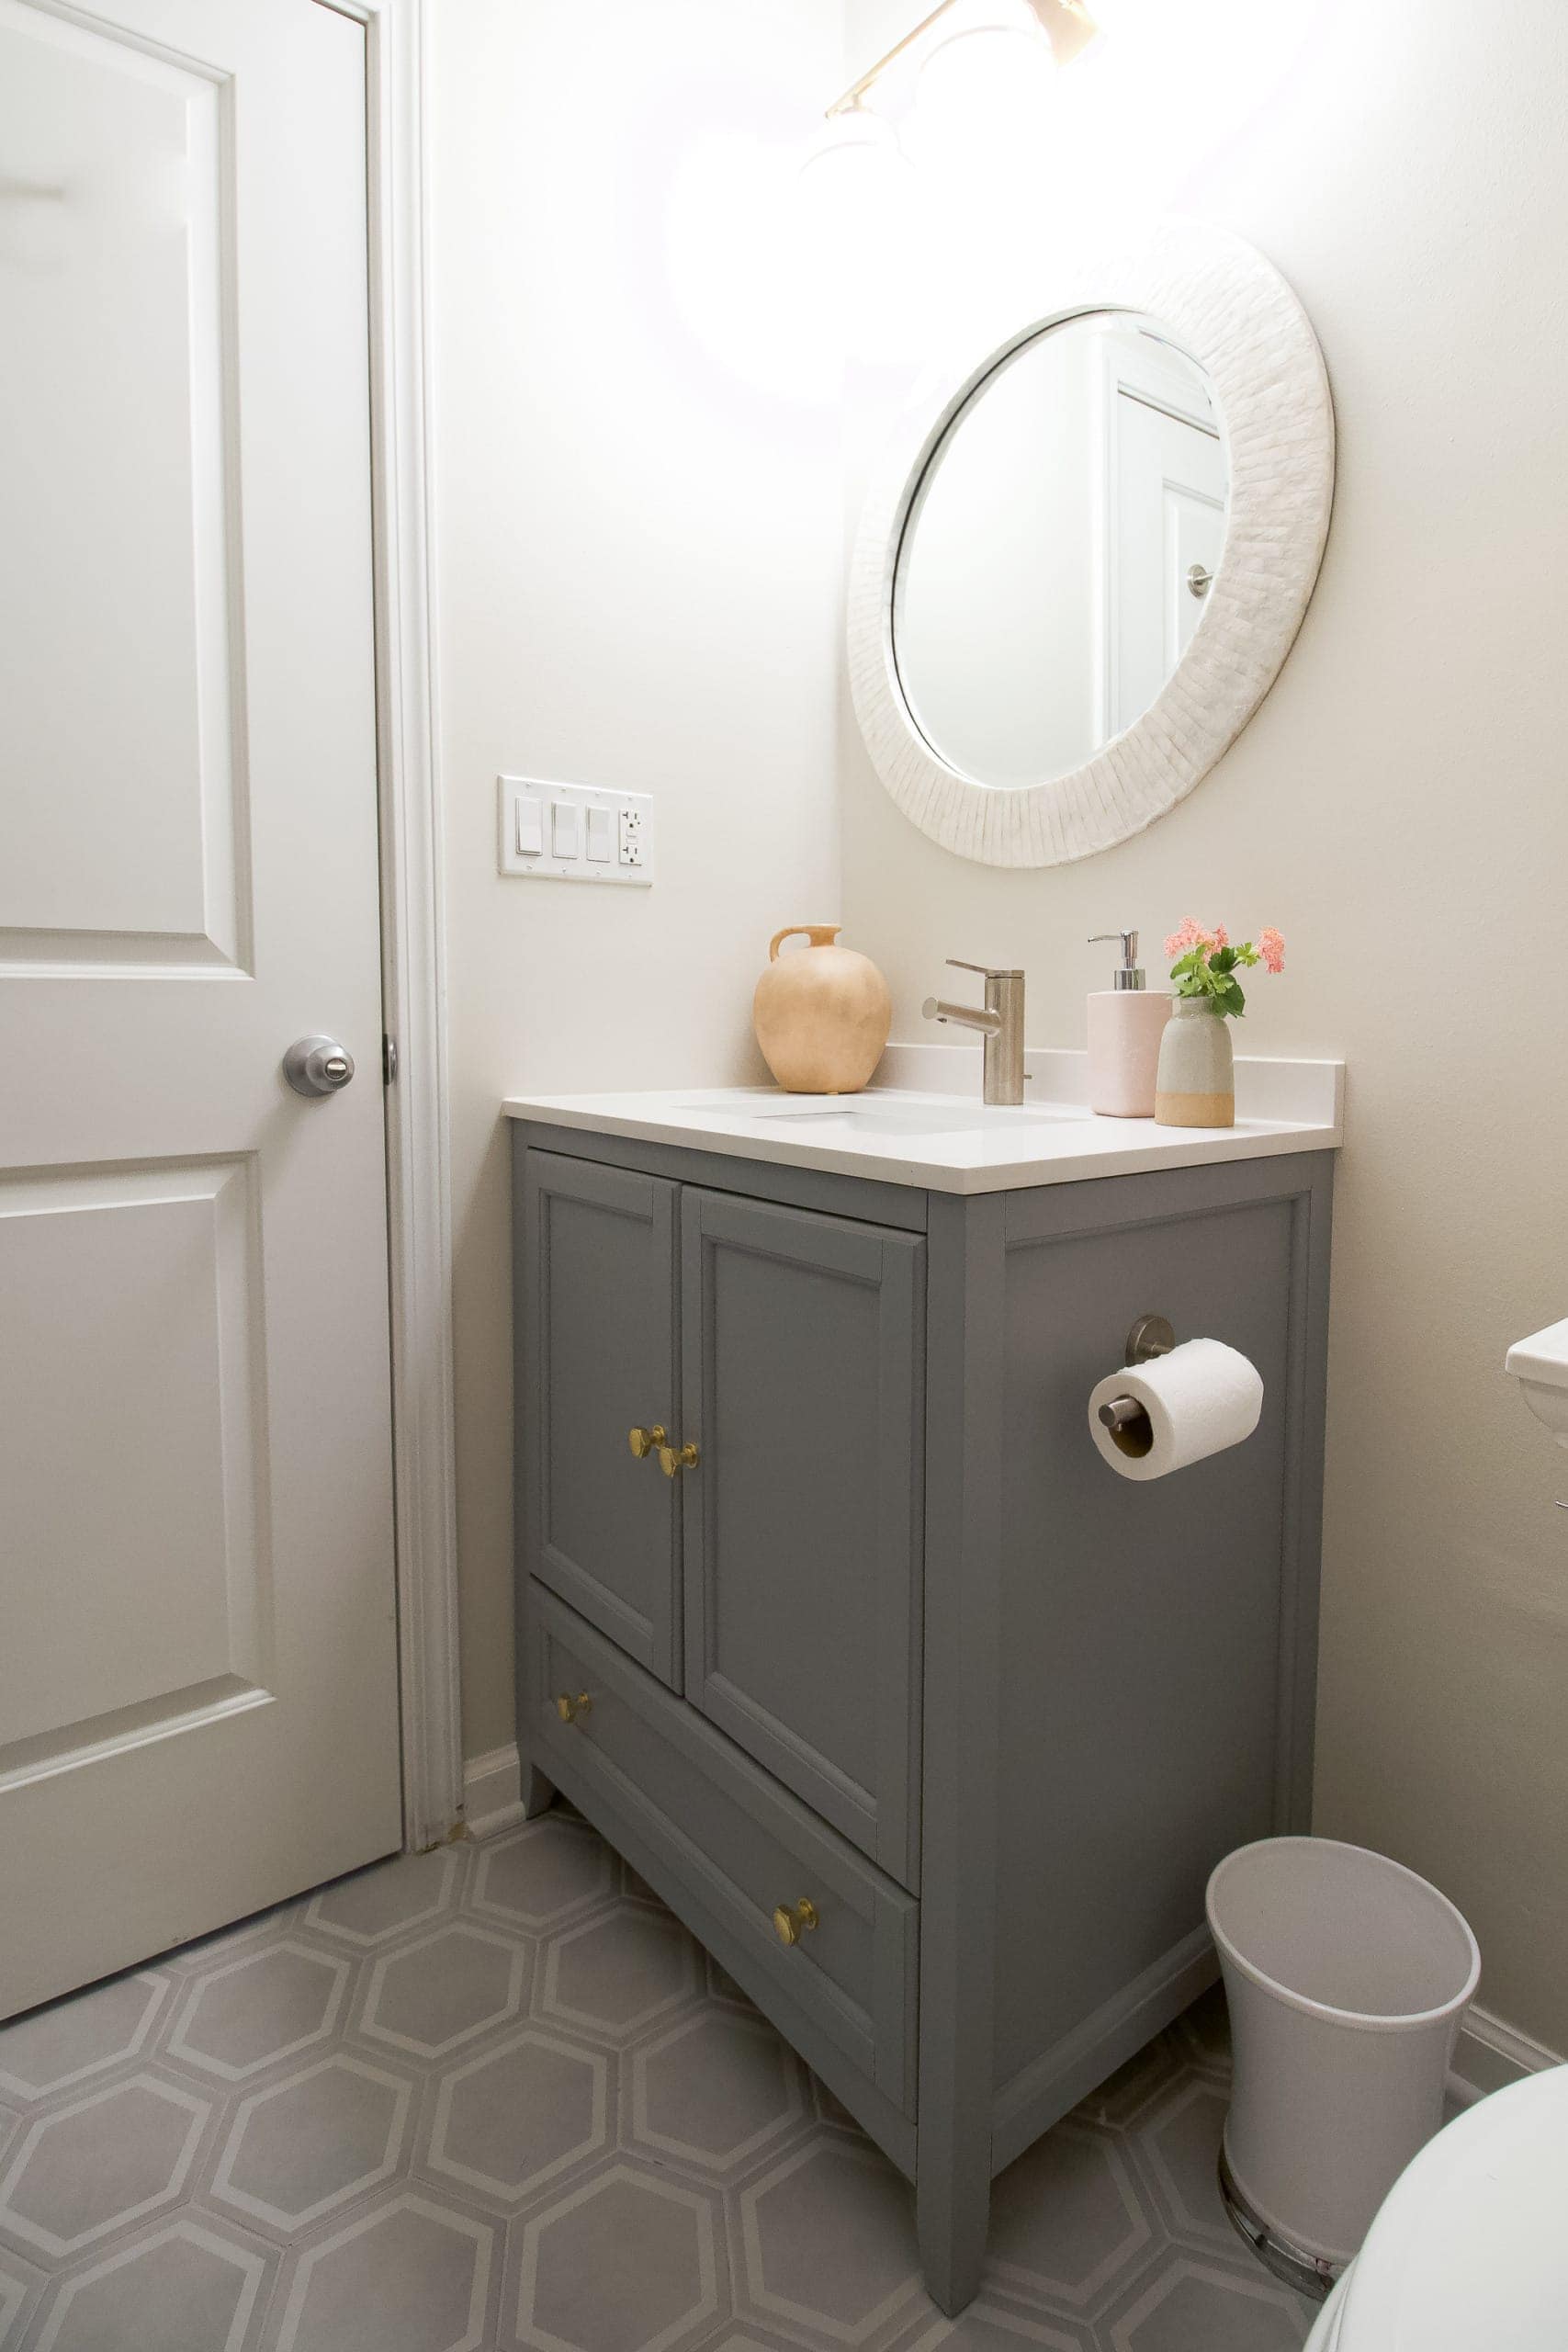 Jan's gray and gold bathroom makeover